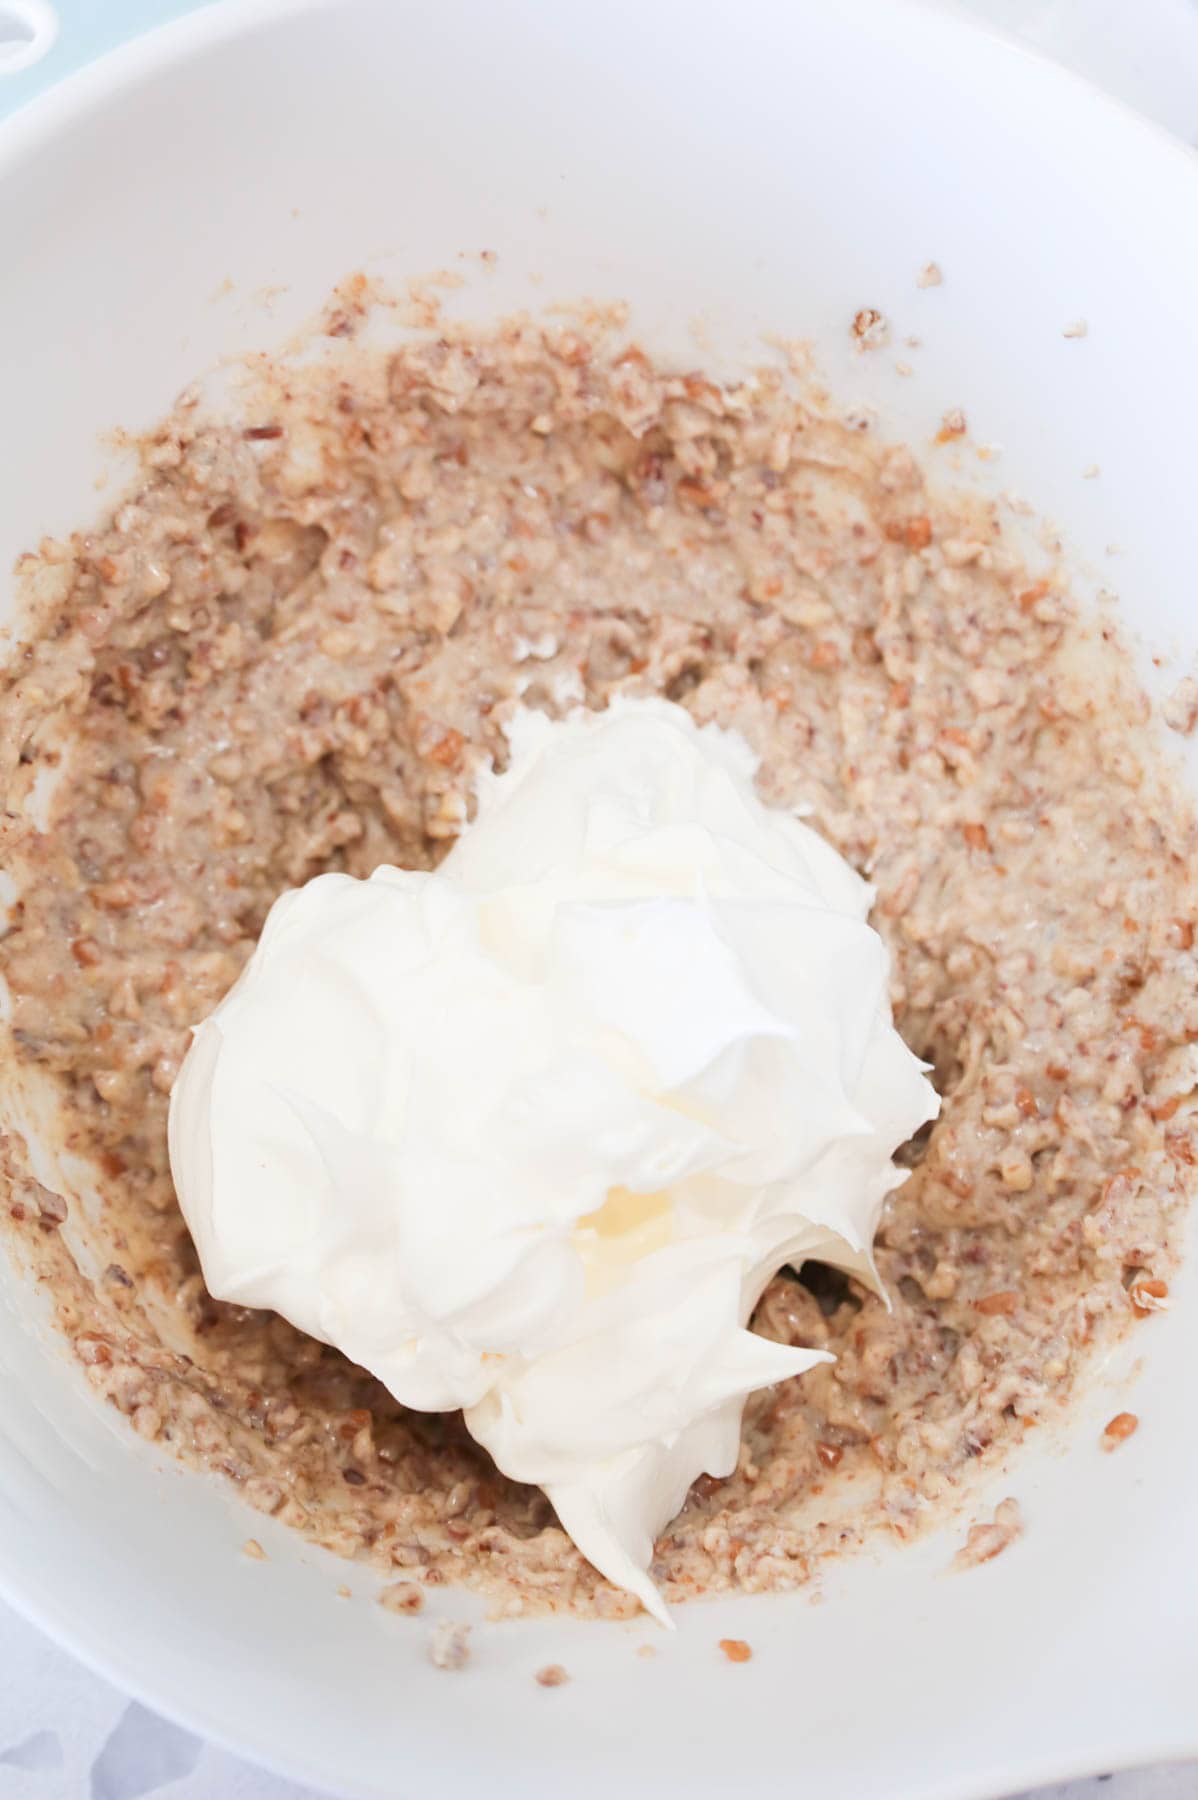 Cool Whip added to mixing bowl with cream cheese pecan mixture